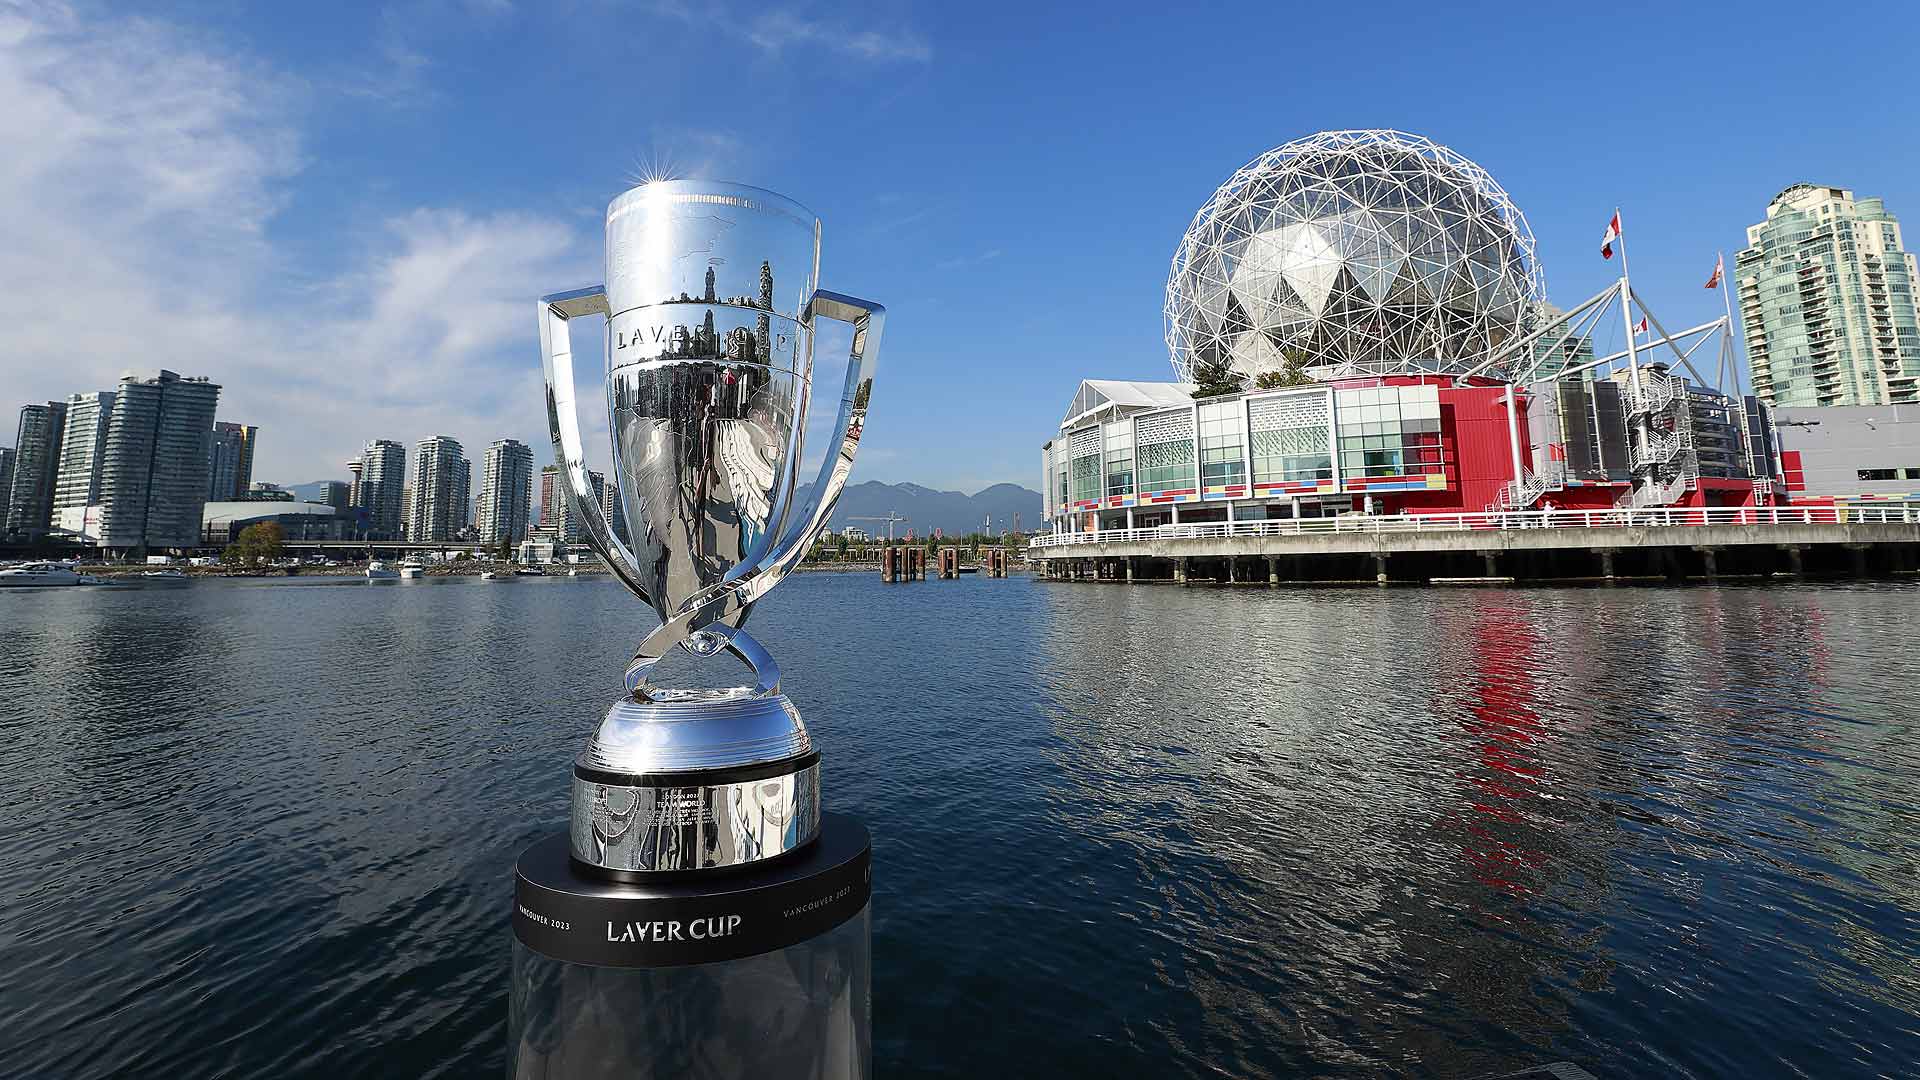 laver cup online free stream